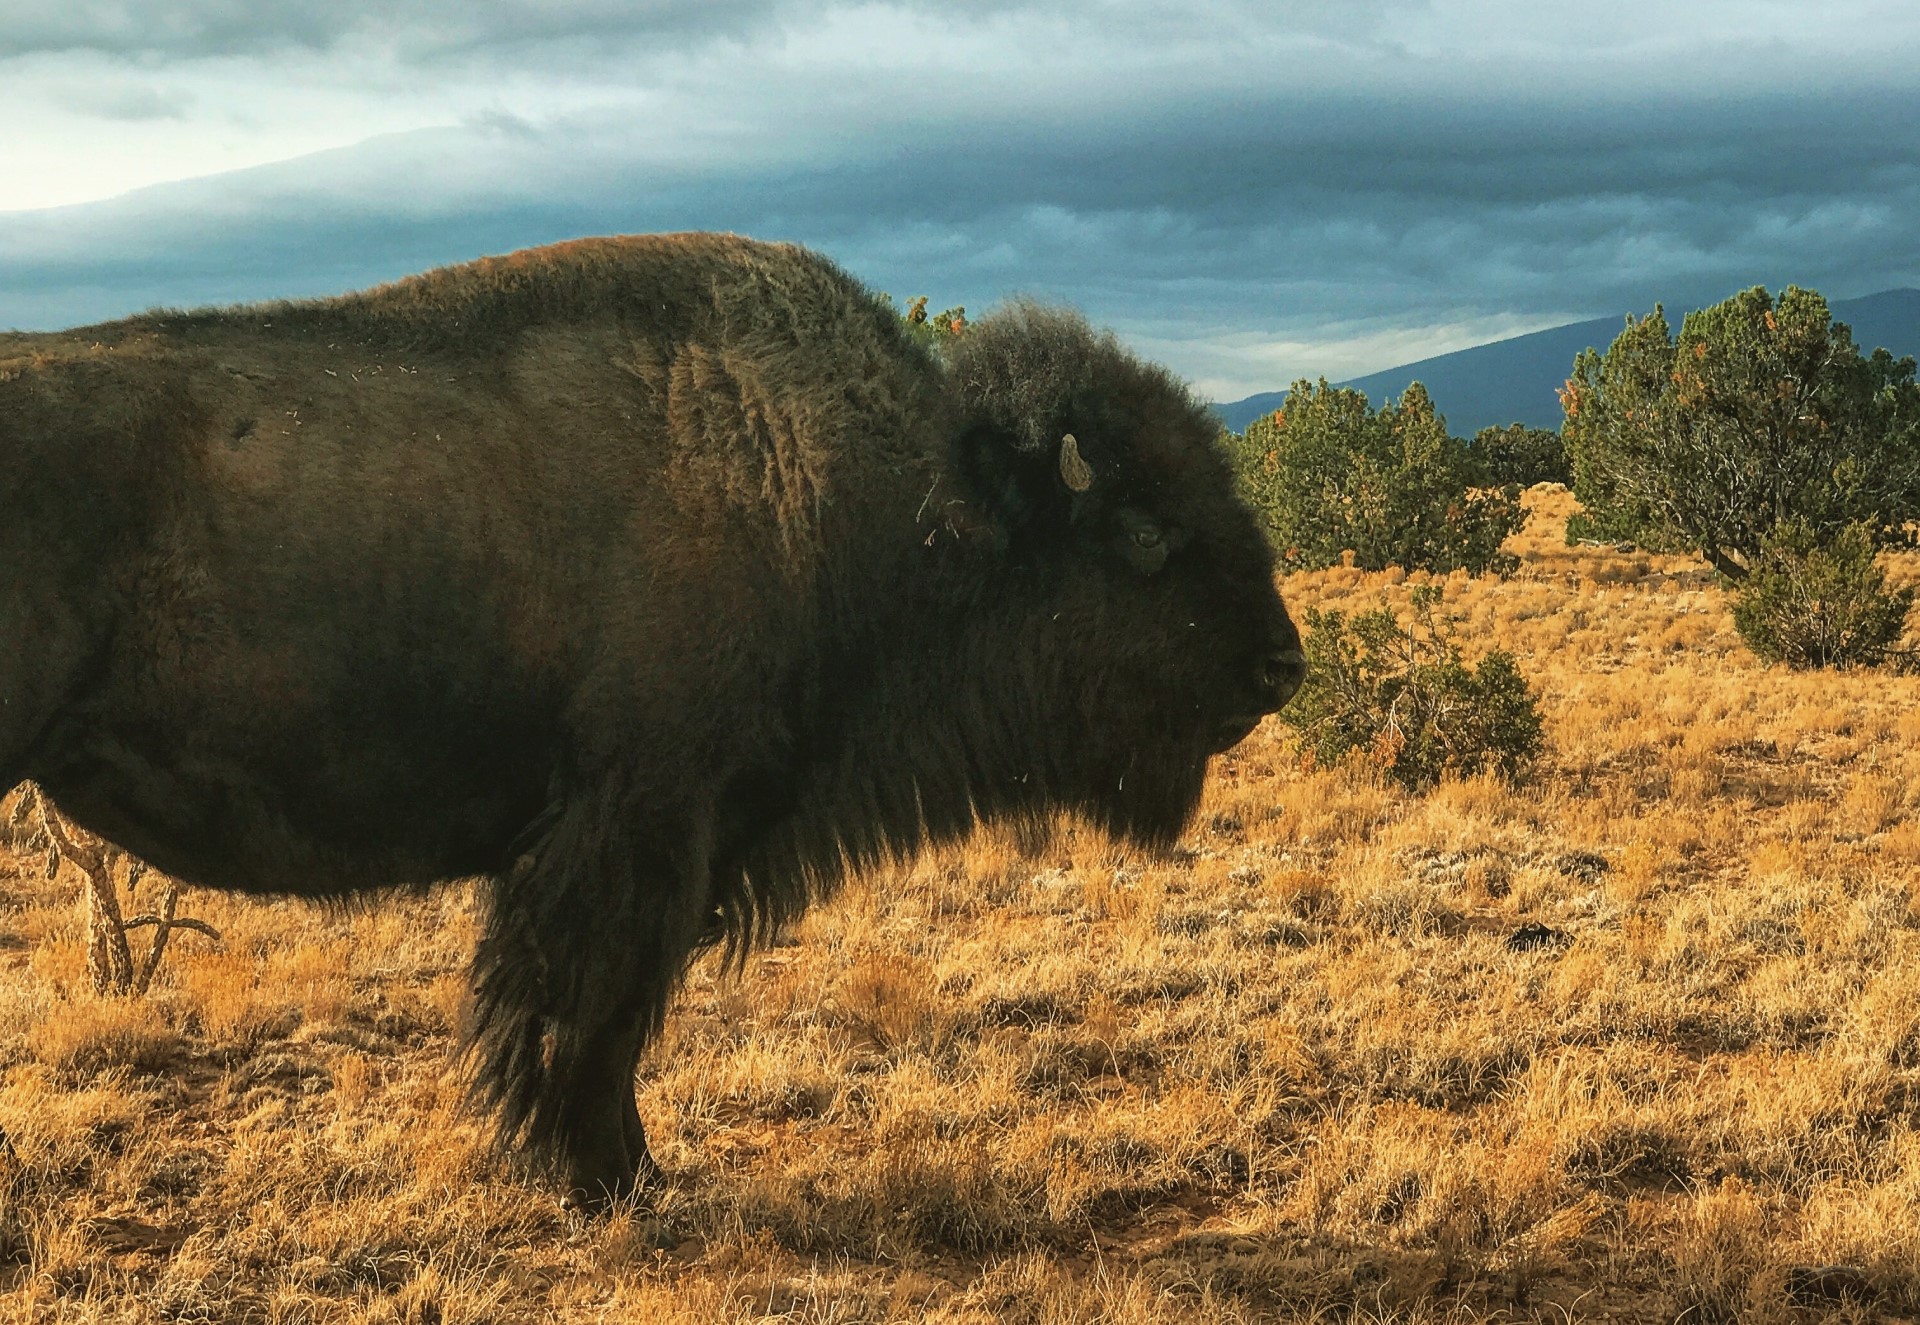 SPOTLIGHT on the American Bison | The bison is a bigger deal than you might think.